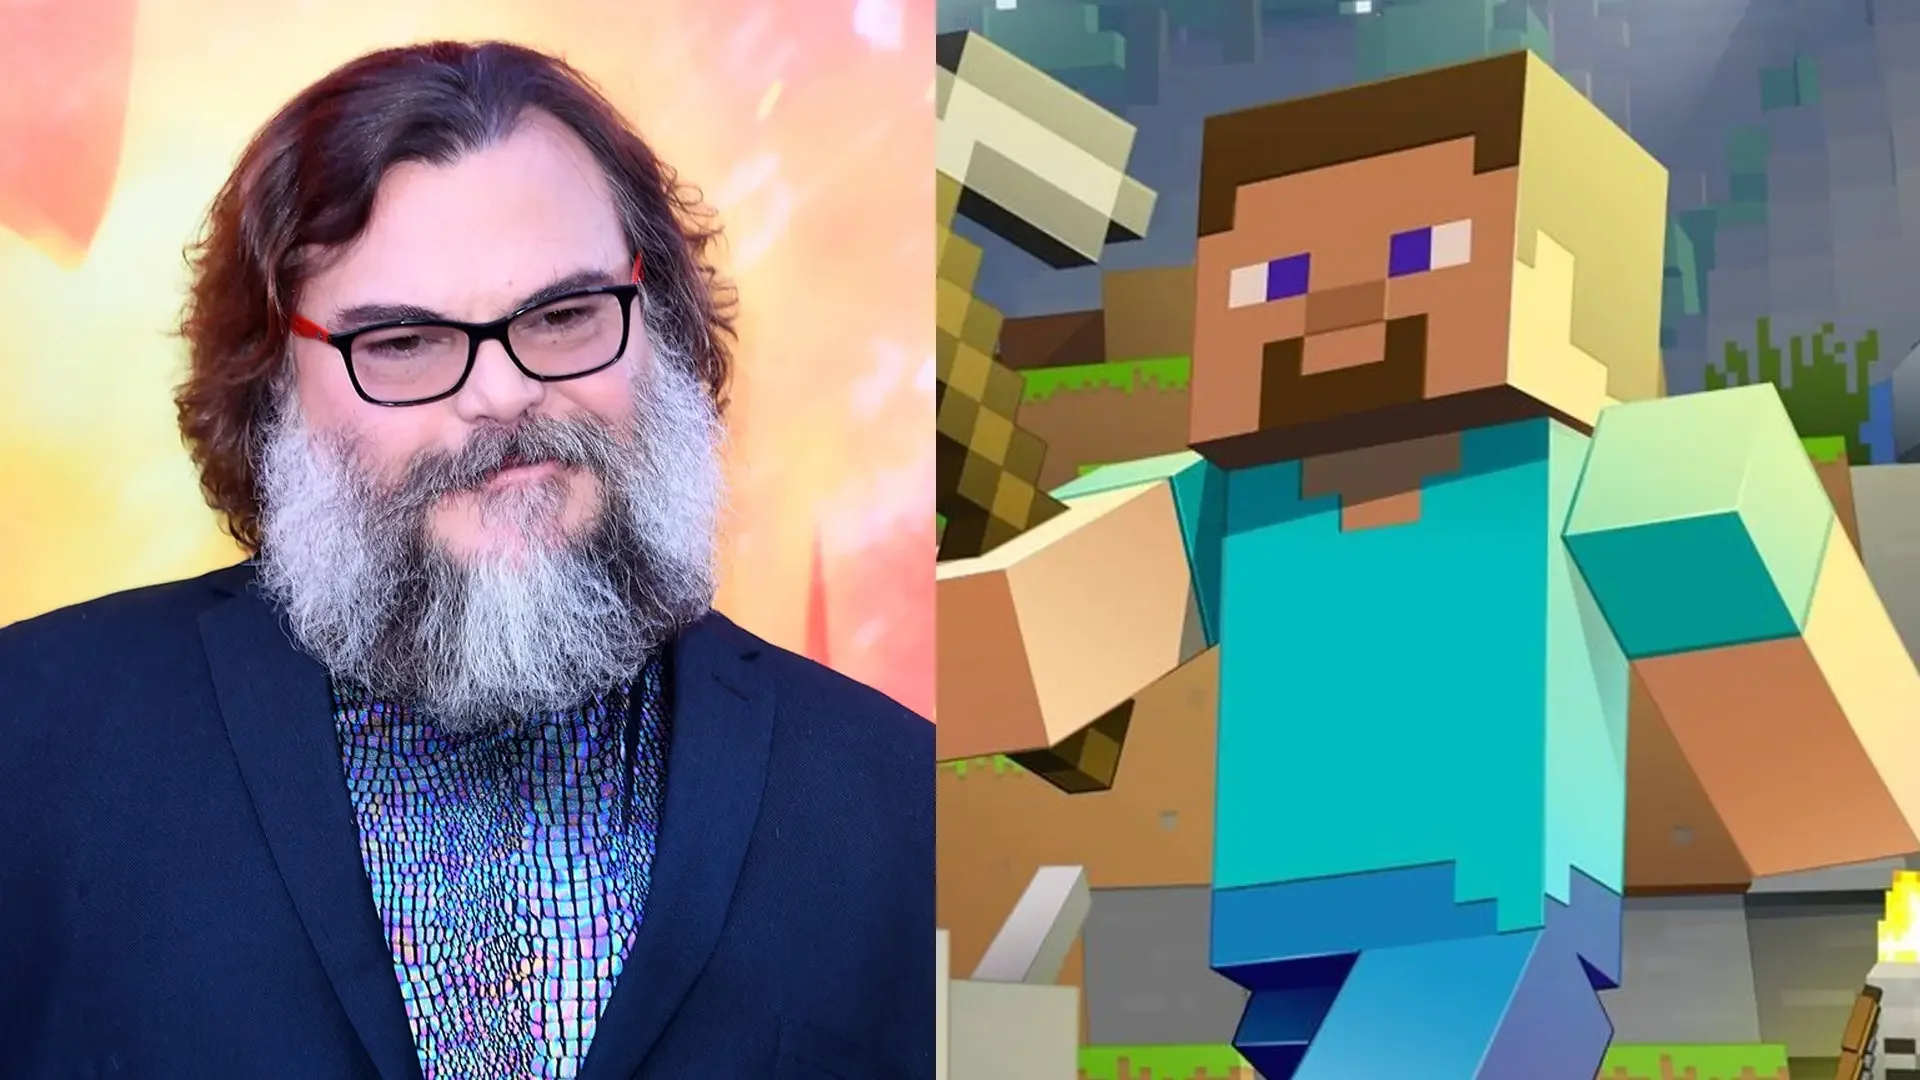 There's a new addition to the Minecraft cast: Jack Black will play one of the roles in the film adaptation